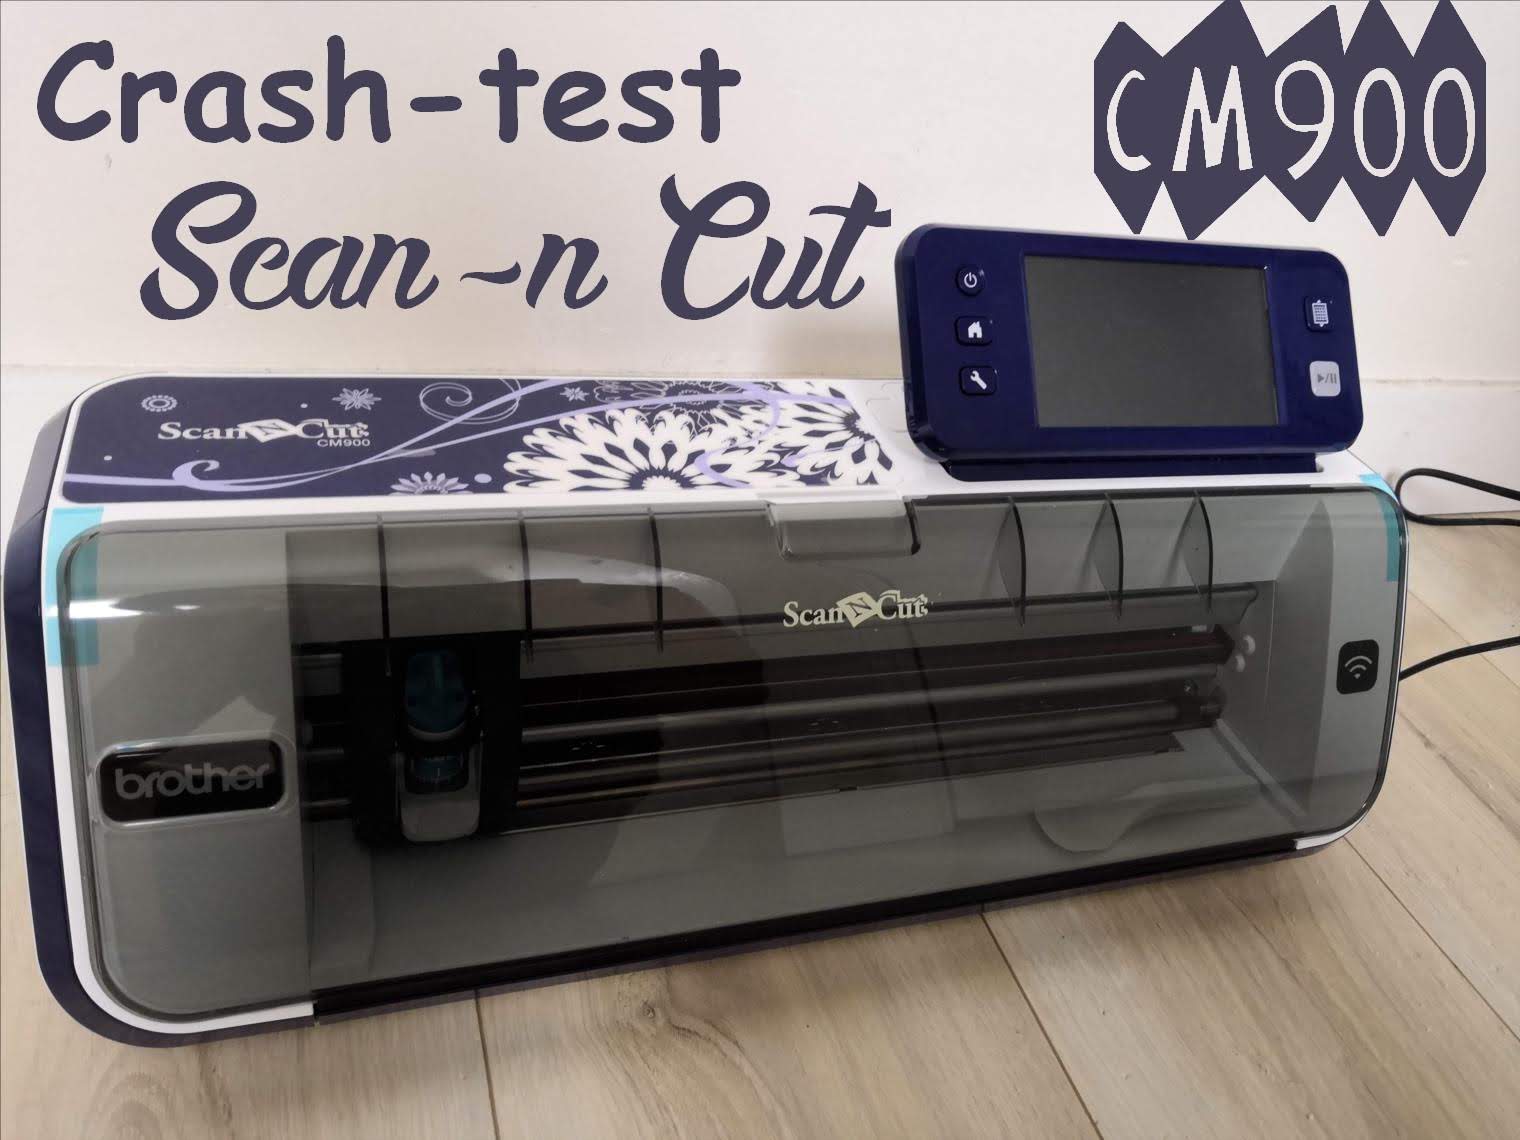 Brother CM350E ScanNCut2 with ScanNCut Online Activation Card – Pete's  Arts, Crafts and Sewing